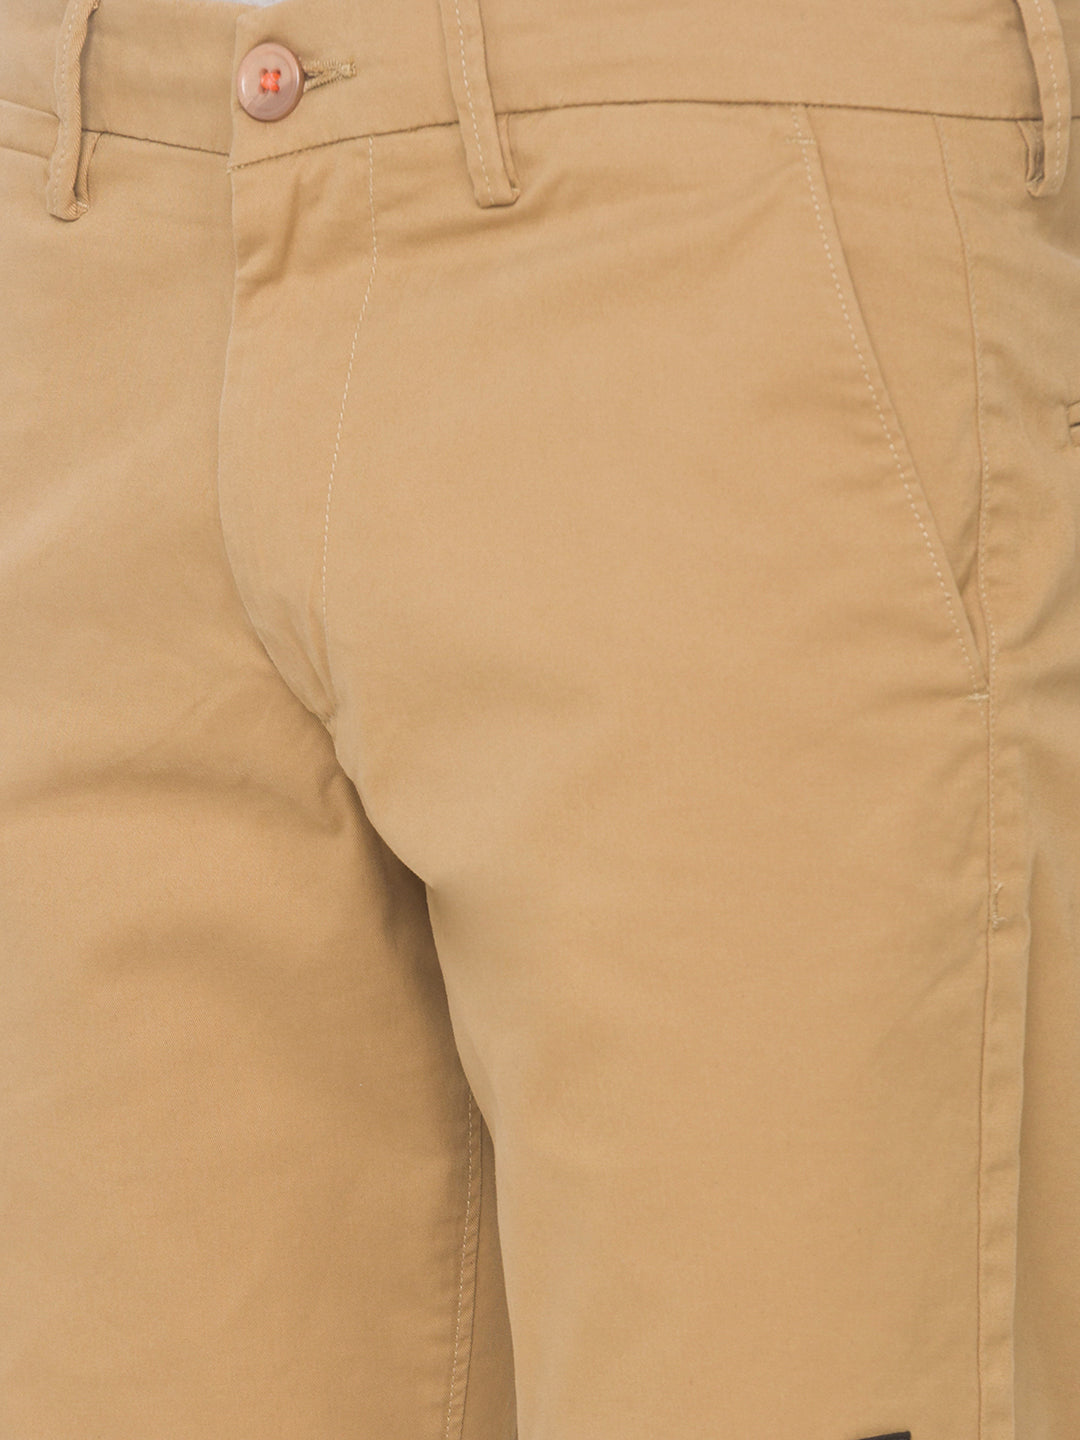 Spykar Men Beige Solid Relaxed Mid-Rise Shorts (Relaxed)